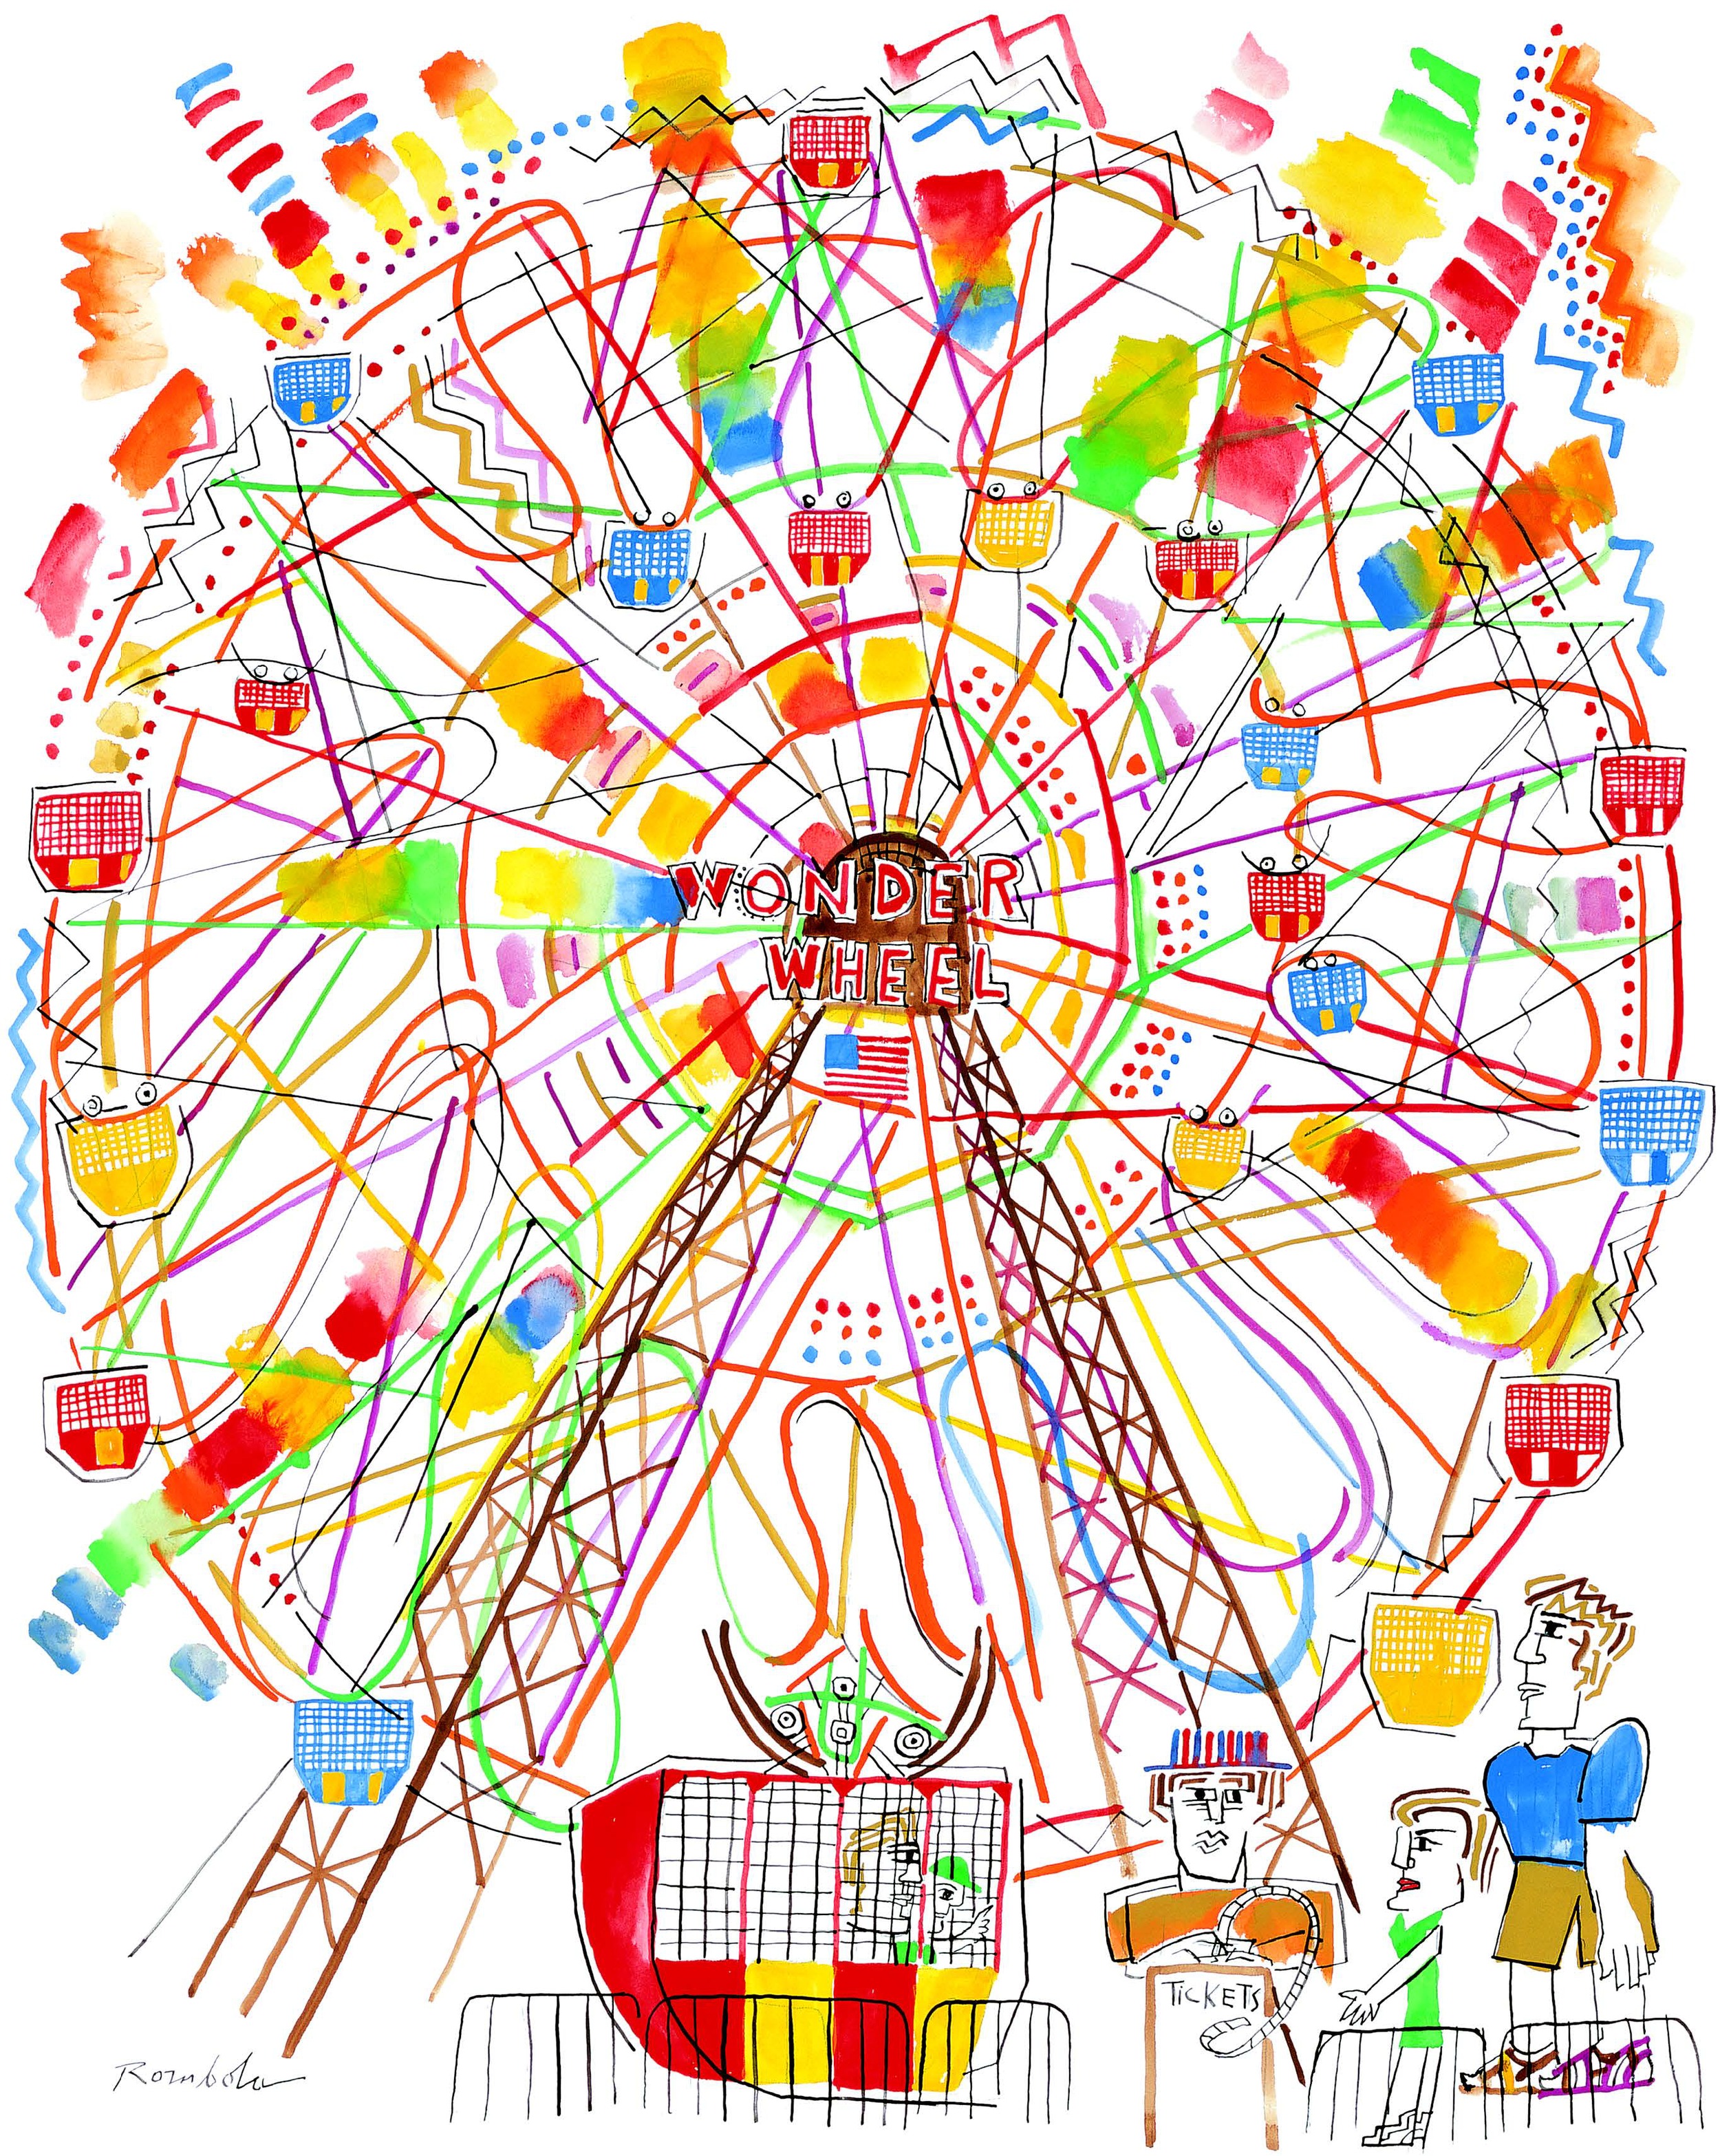   Wonder Wheel    Gouache and ink on paper 2005   